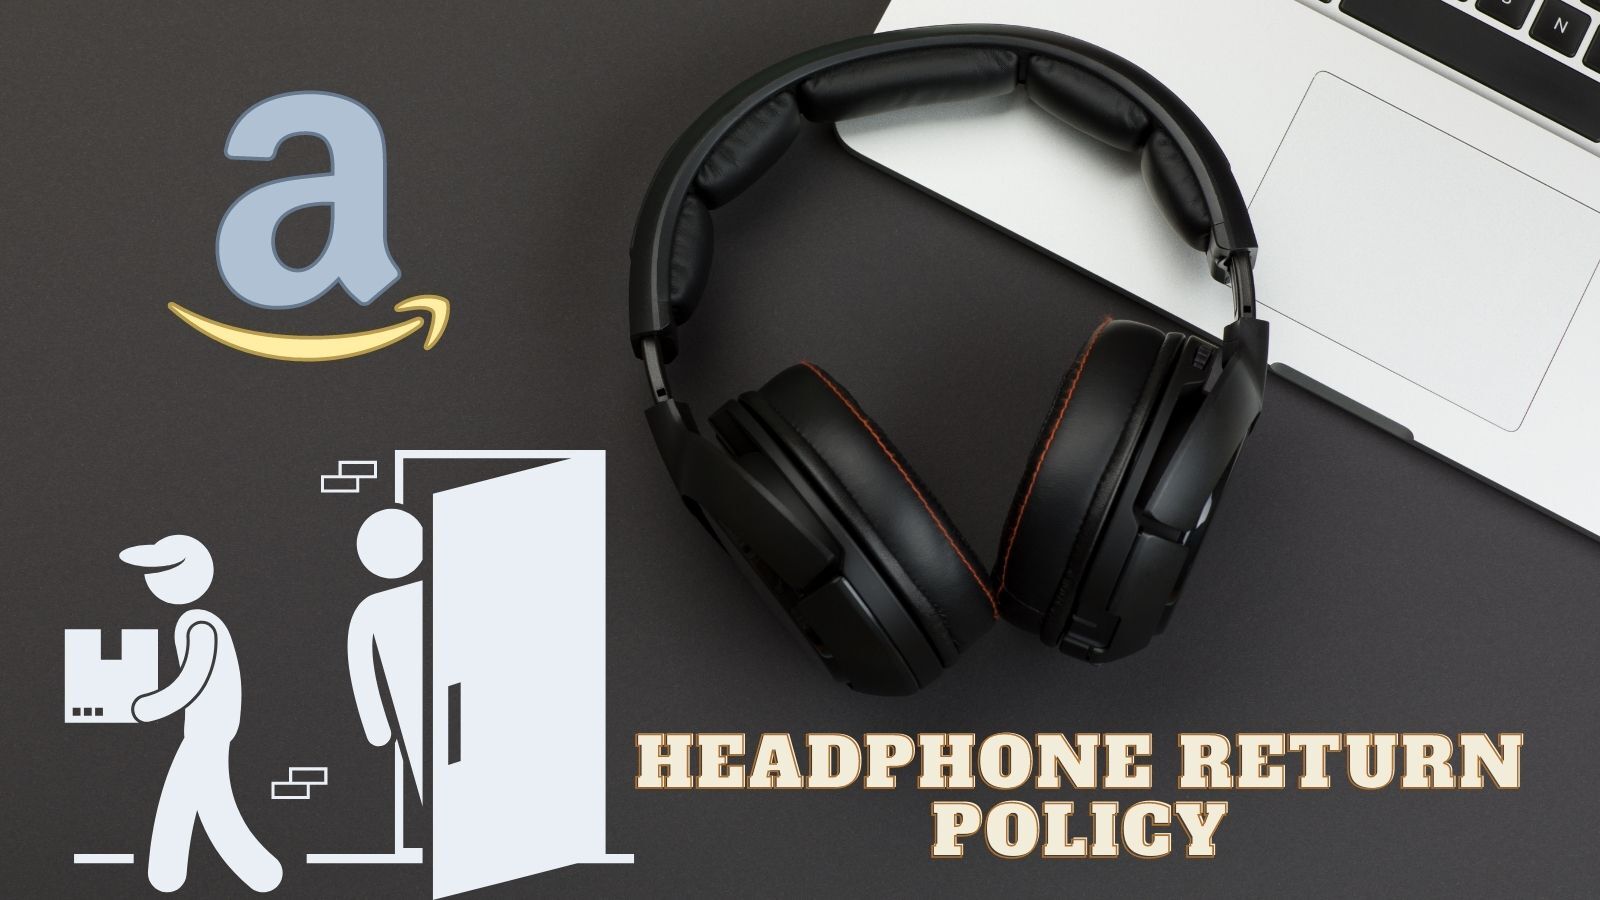 Amazon Headphone Return Policy (All You Need to Know)